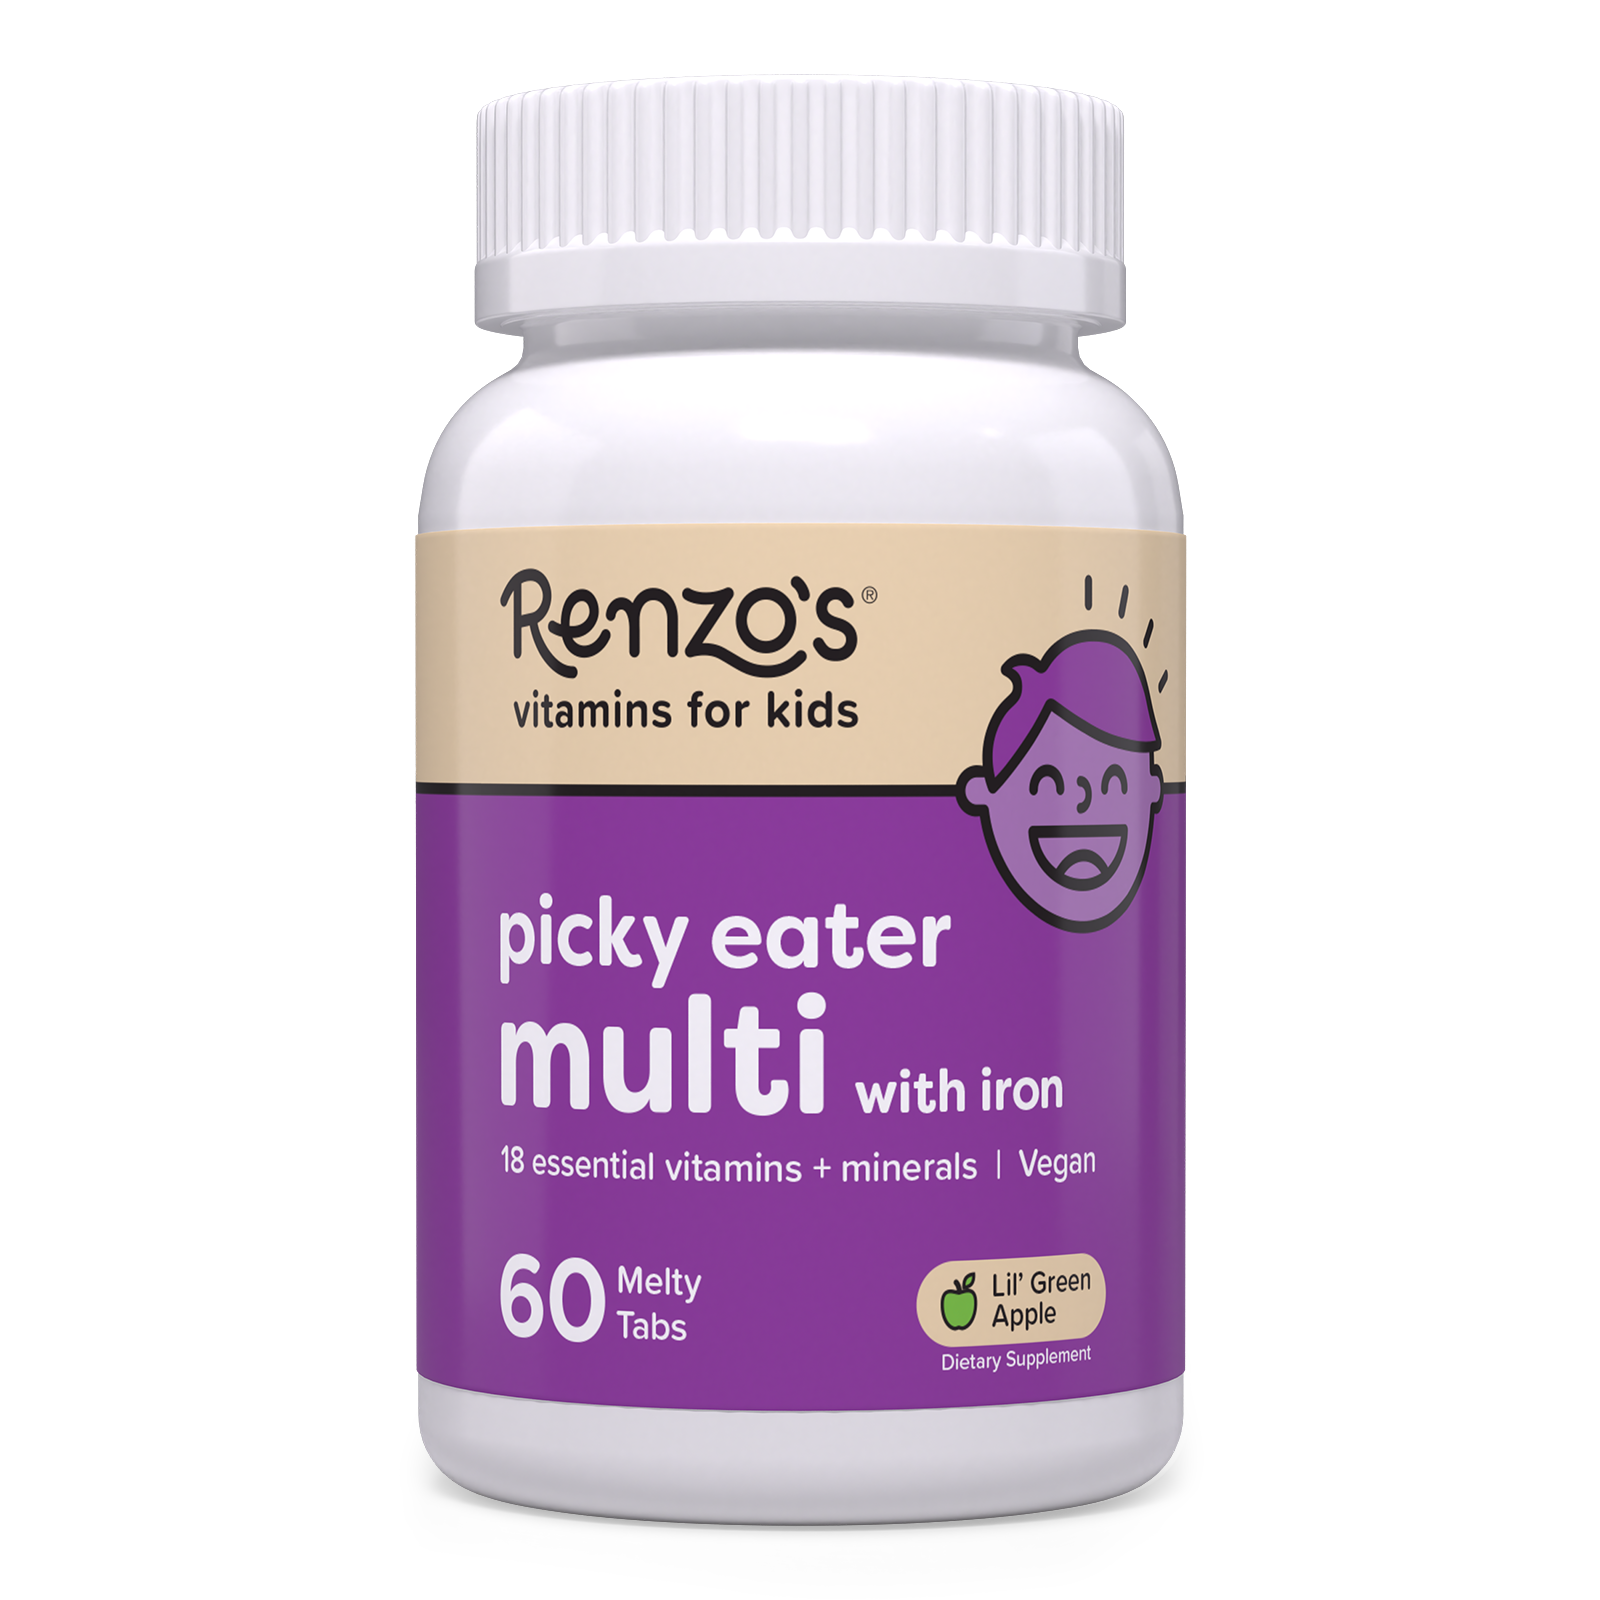 Renzo's Vitamins apple-flavored childrens multivitamin for picky eaters bottle upright on a white surface